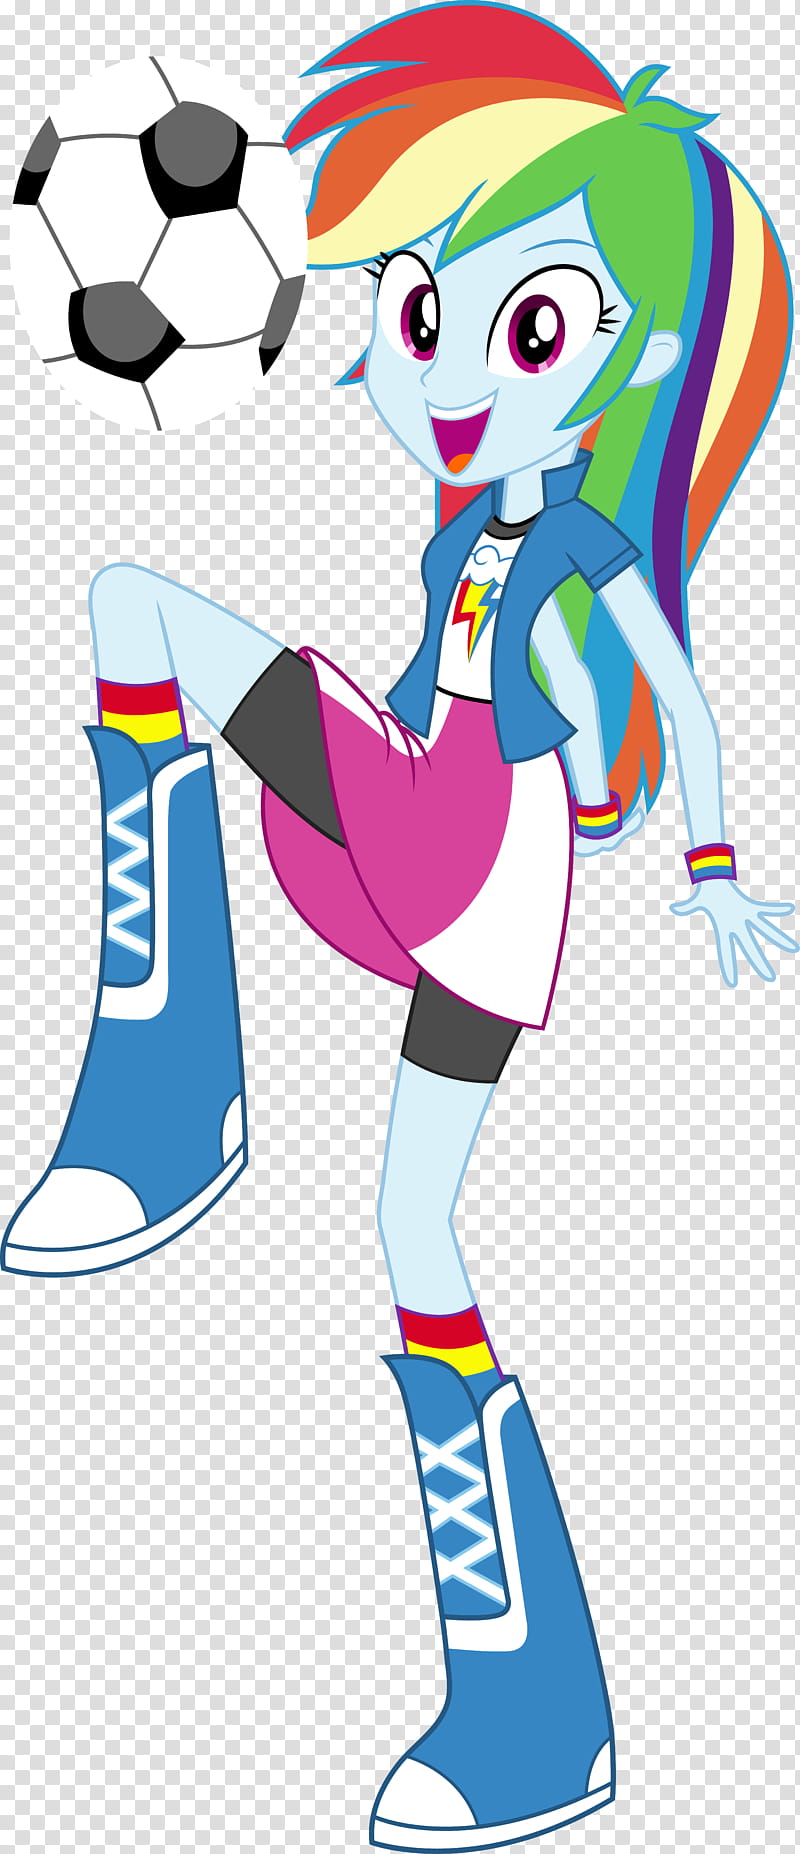 Equestria Girls Rainbow Dash, multicolored girl joggling soccer ball transparent background PNG clipart